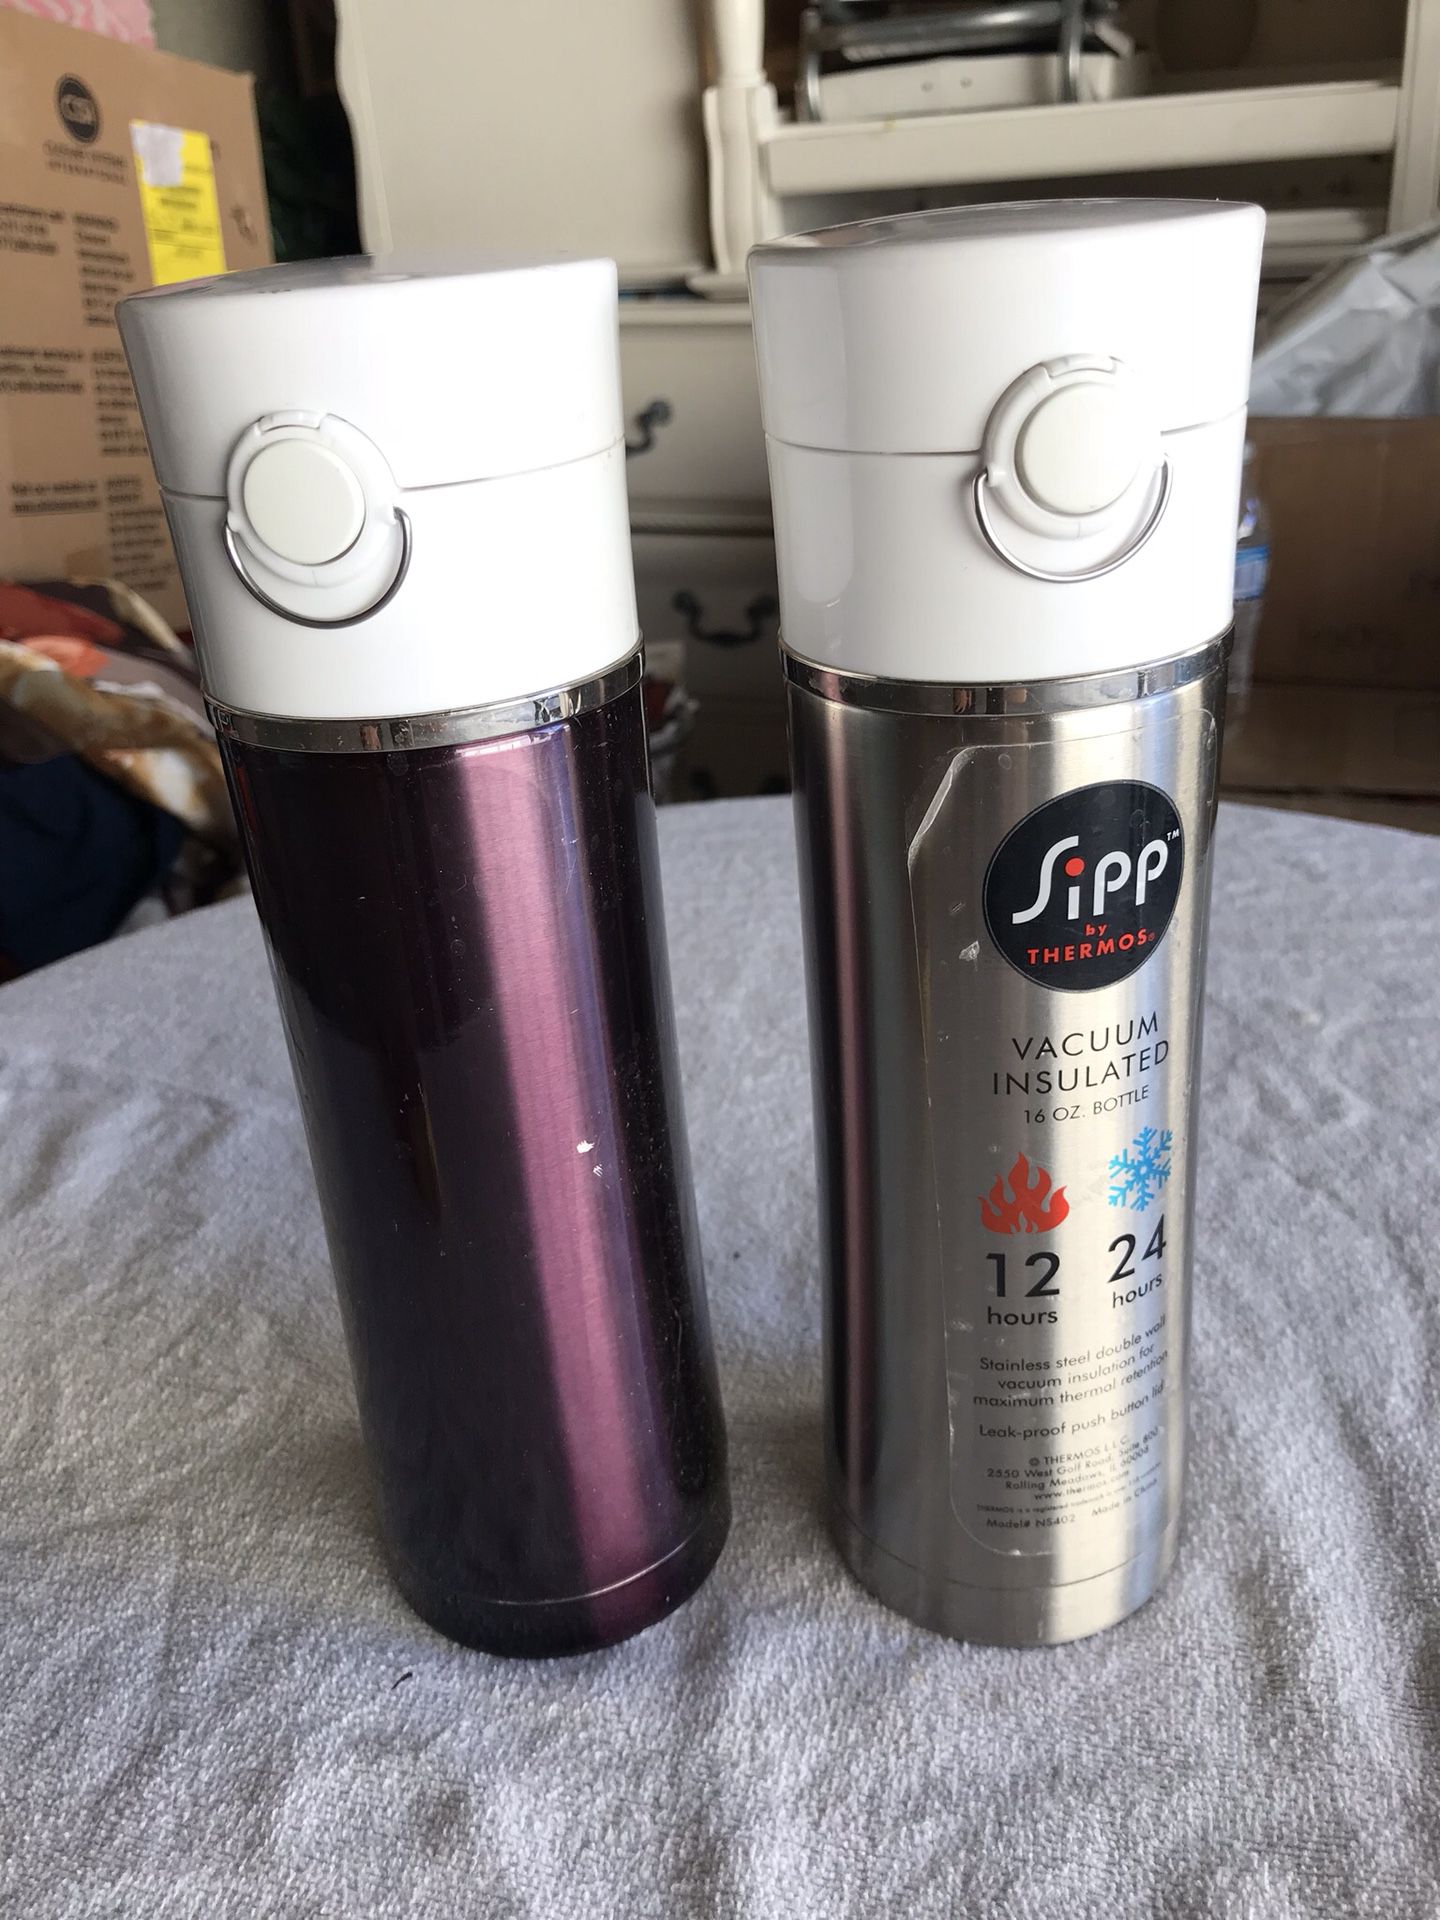 2 Stainless Steel SIPP Thermos for Sale in Downey, CA - OfferUp